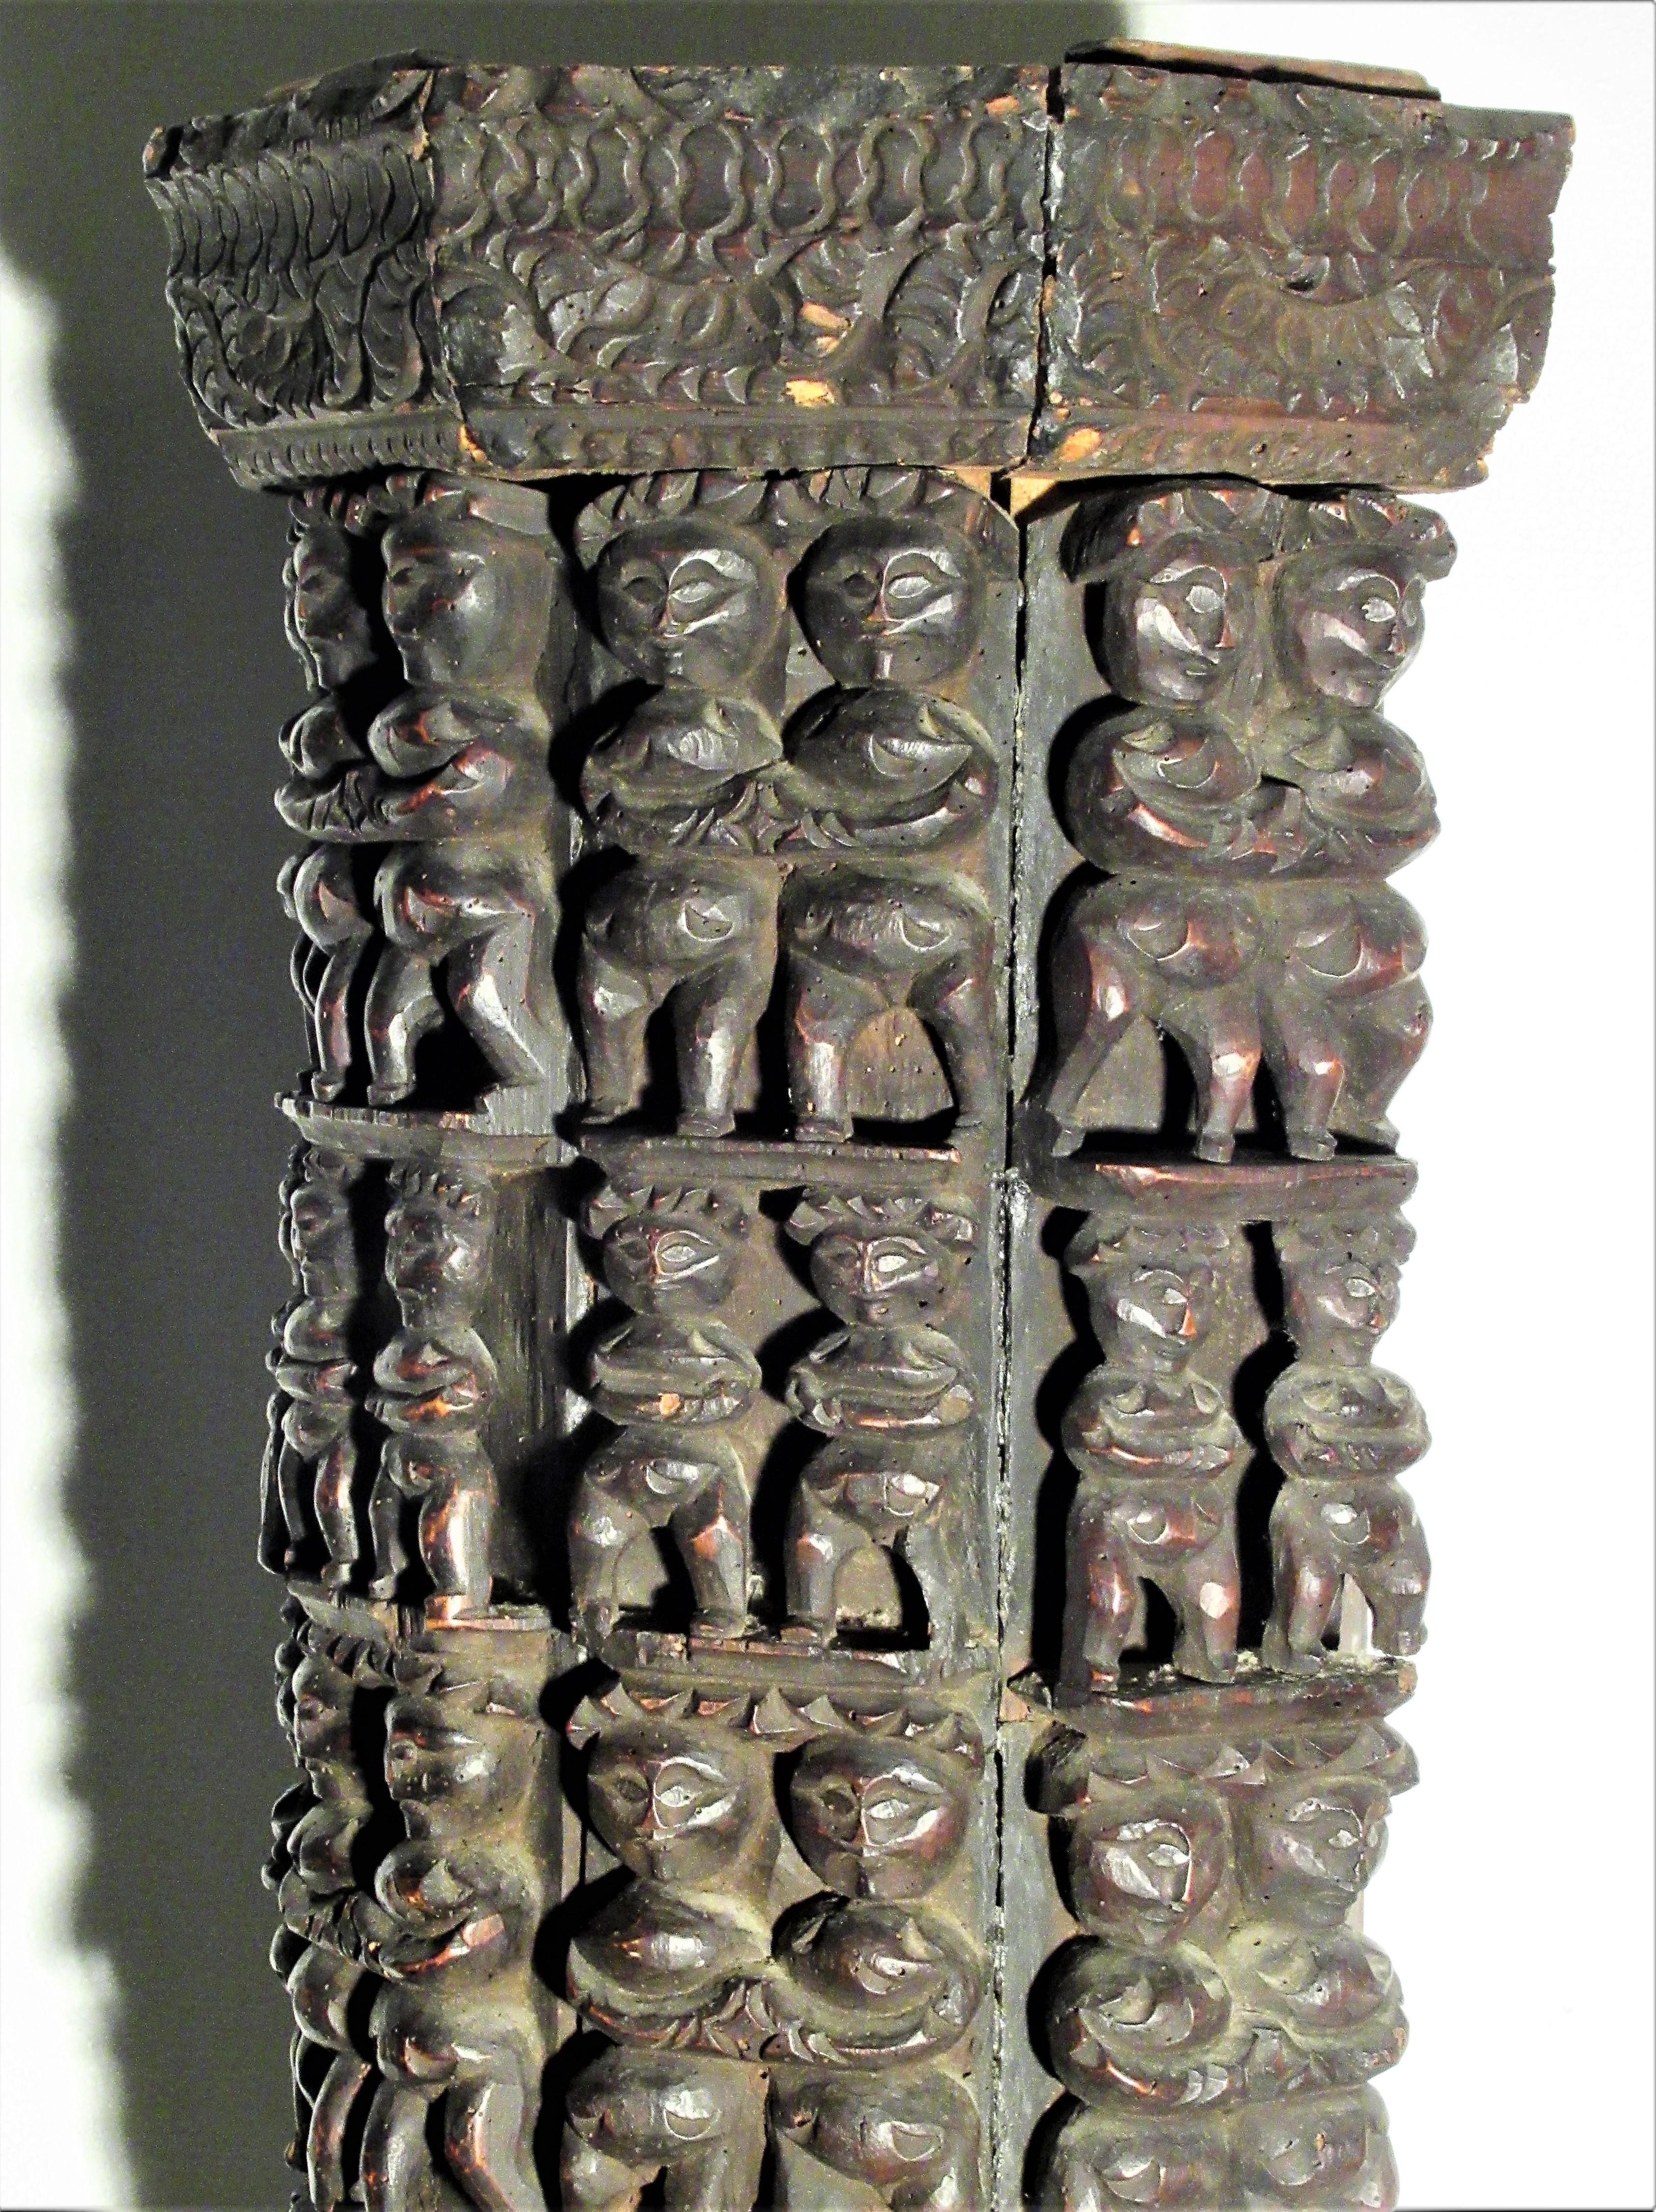 Antique pedestal constructed of carved wood architectural panels mounted with various sized repeating primitive bold ceremonial or fertility type figures. Origin believed to be Nagaland, India. The figural carvings with beautifully aged deep rich